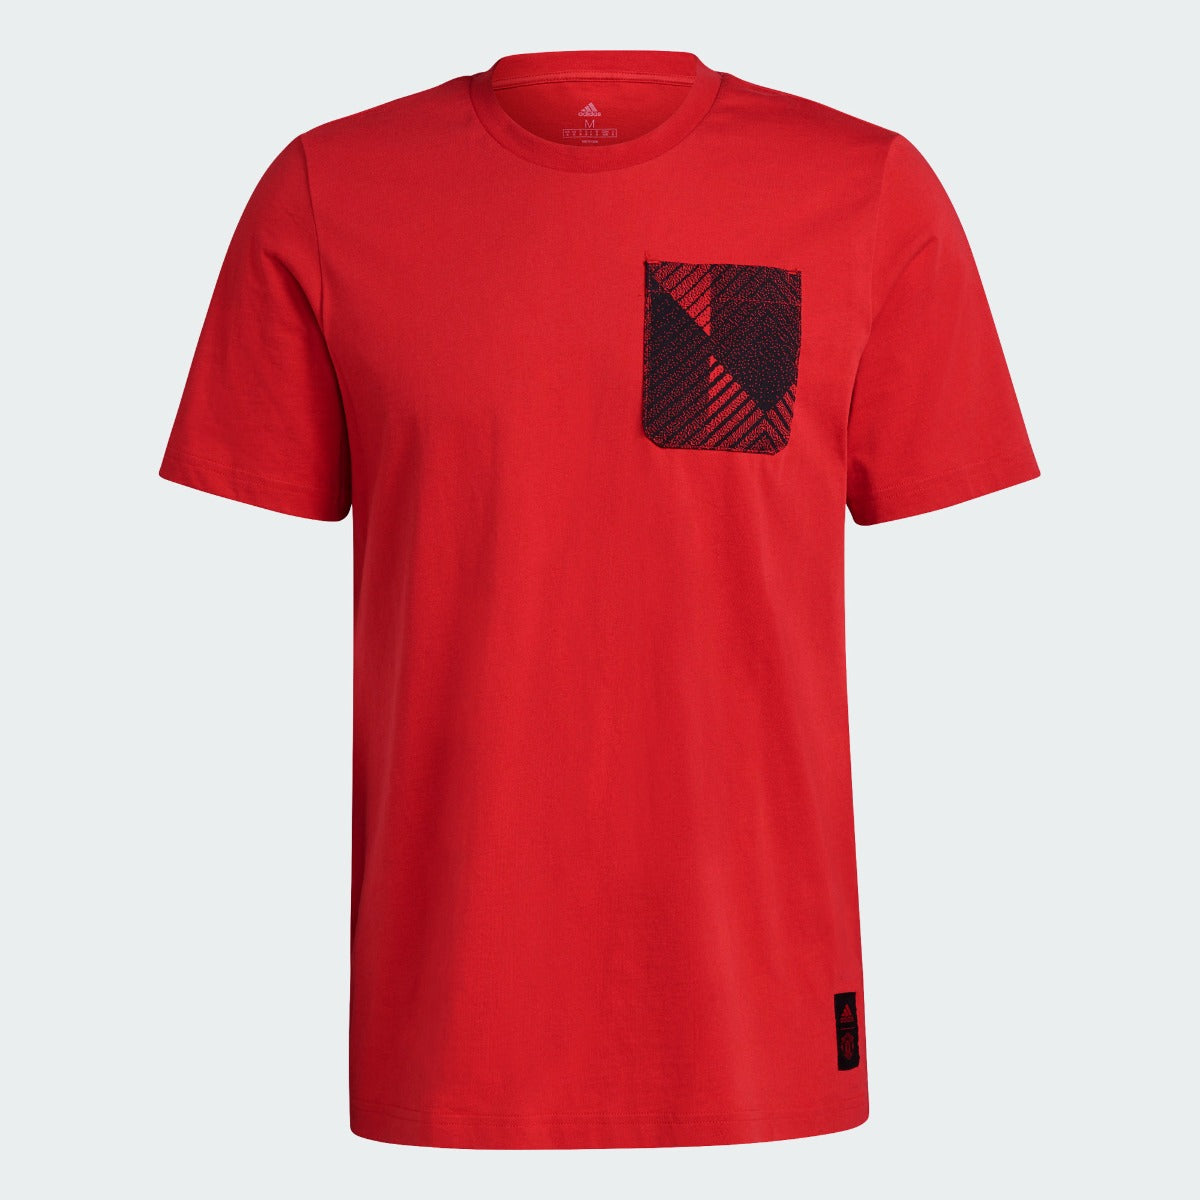 Adidas 2021-22 Manchester United Street Tee - Red (Front)